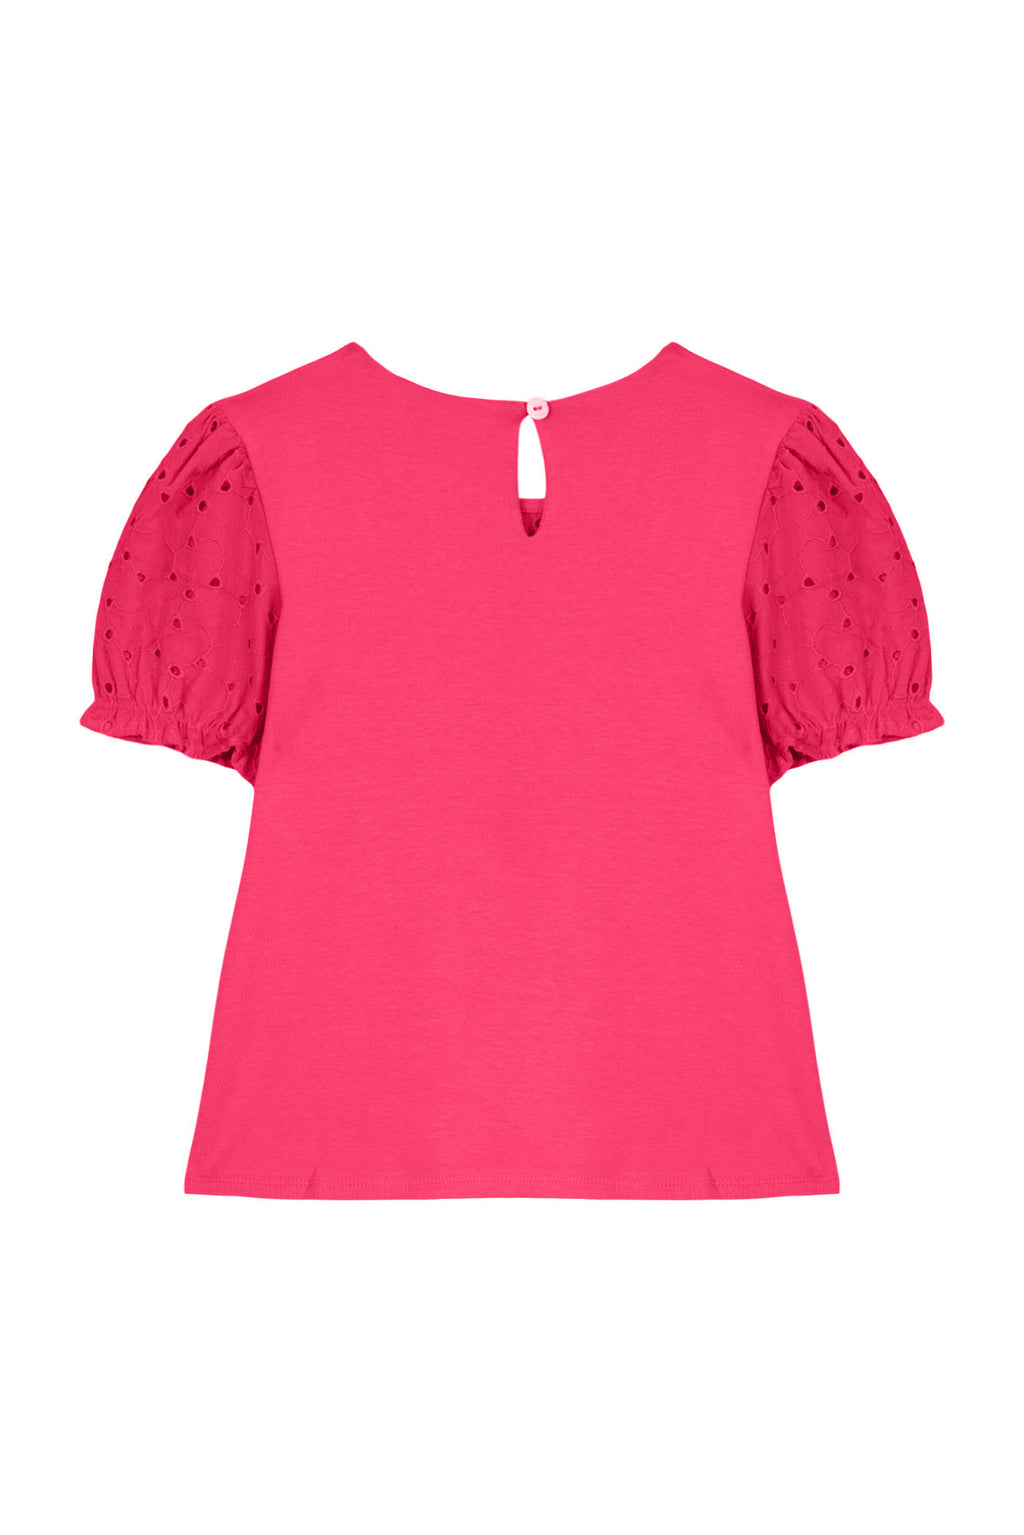 T-shirt - bougainvillier broderie anglaise